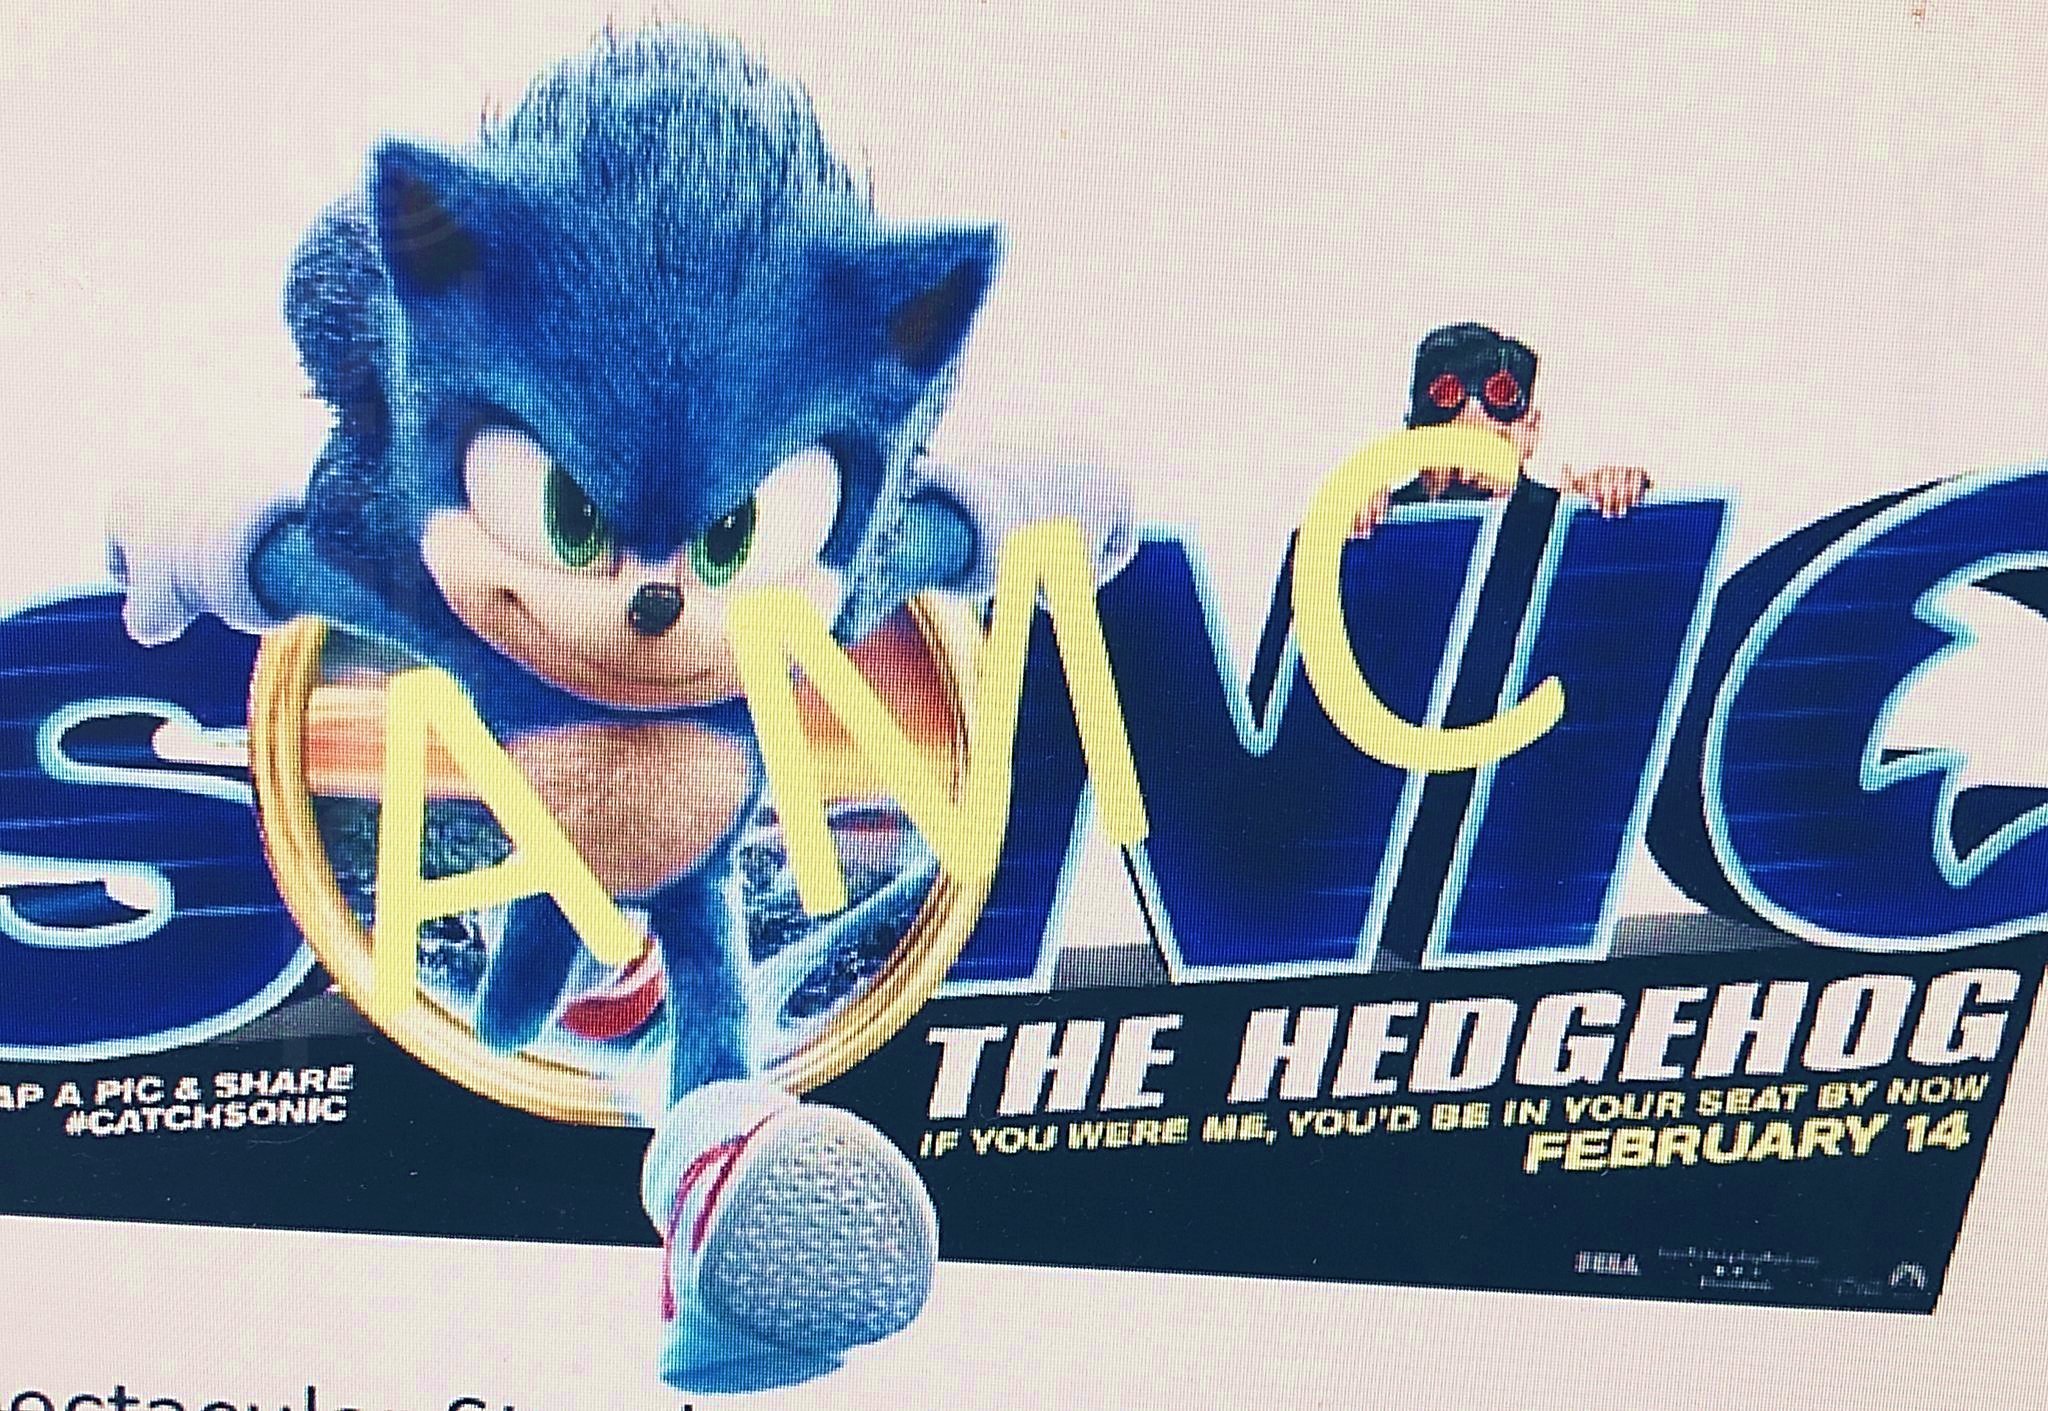 Sonic the Hedgehog Movie Trailer & Poster Reveal Sonic's Redesign